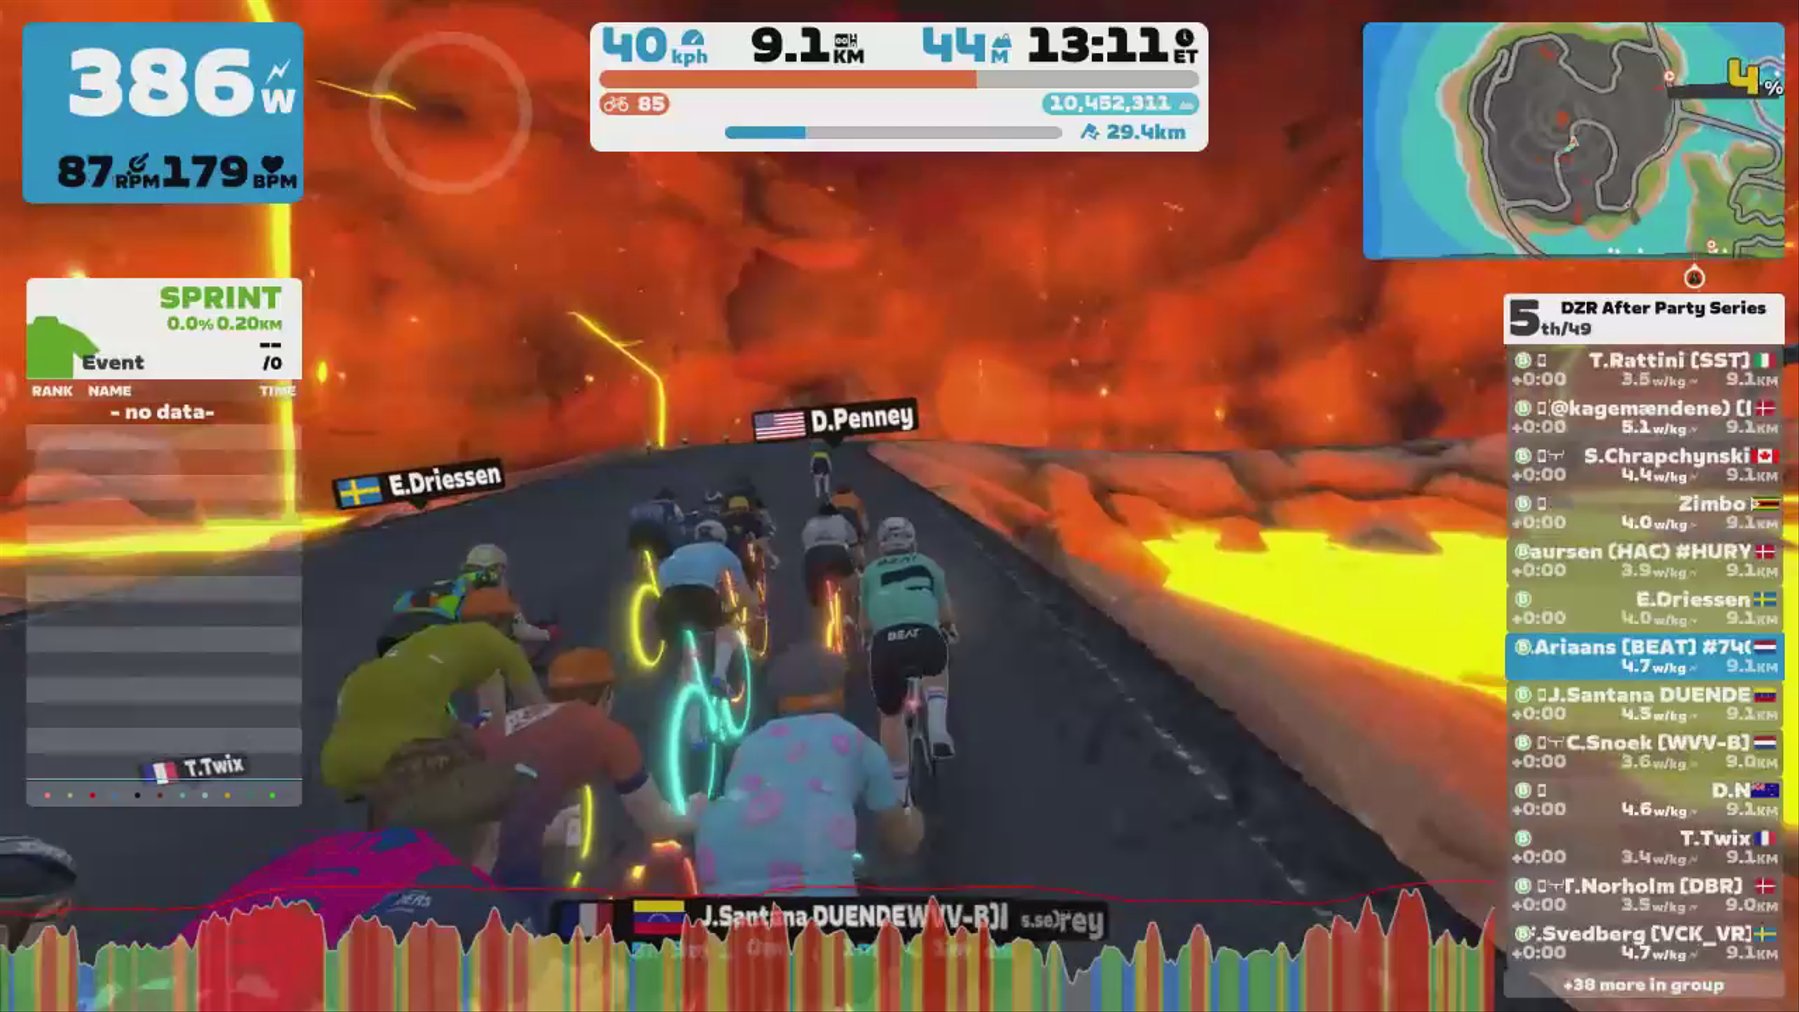 Zwift - Race: DZR After Party Series (B) on Volcano Climb in Watopia